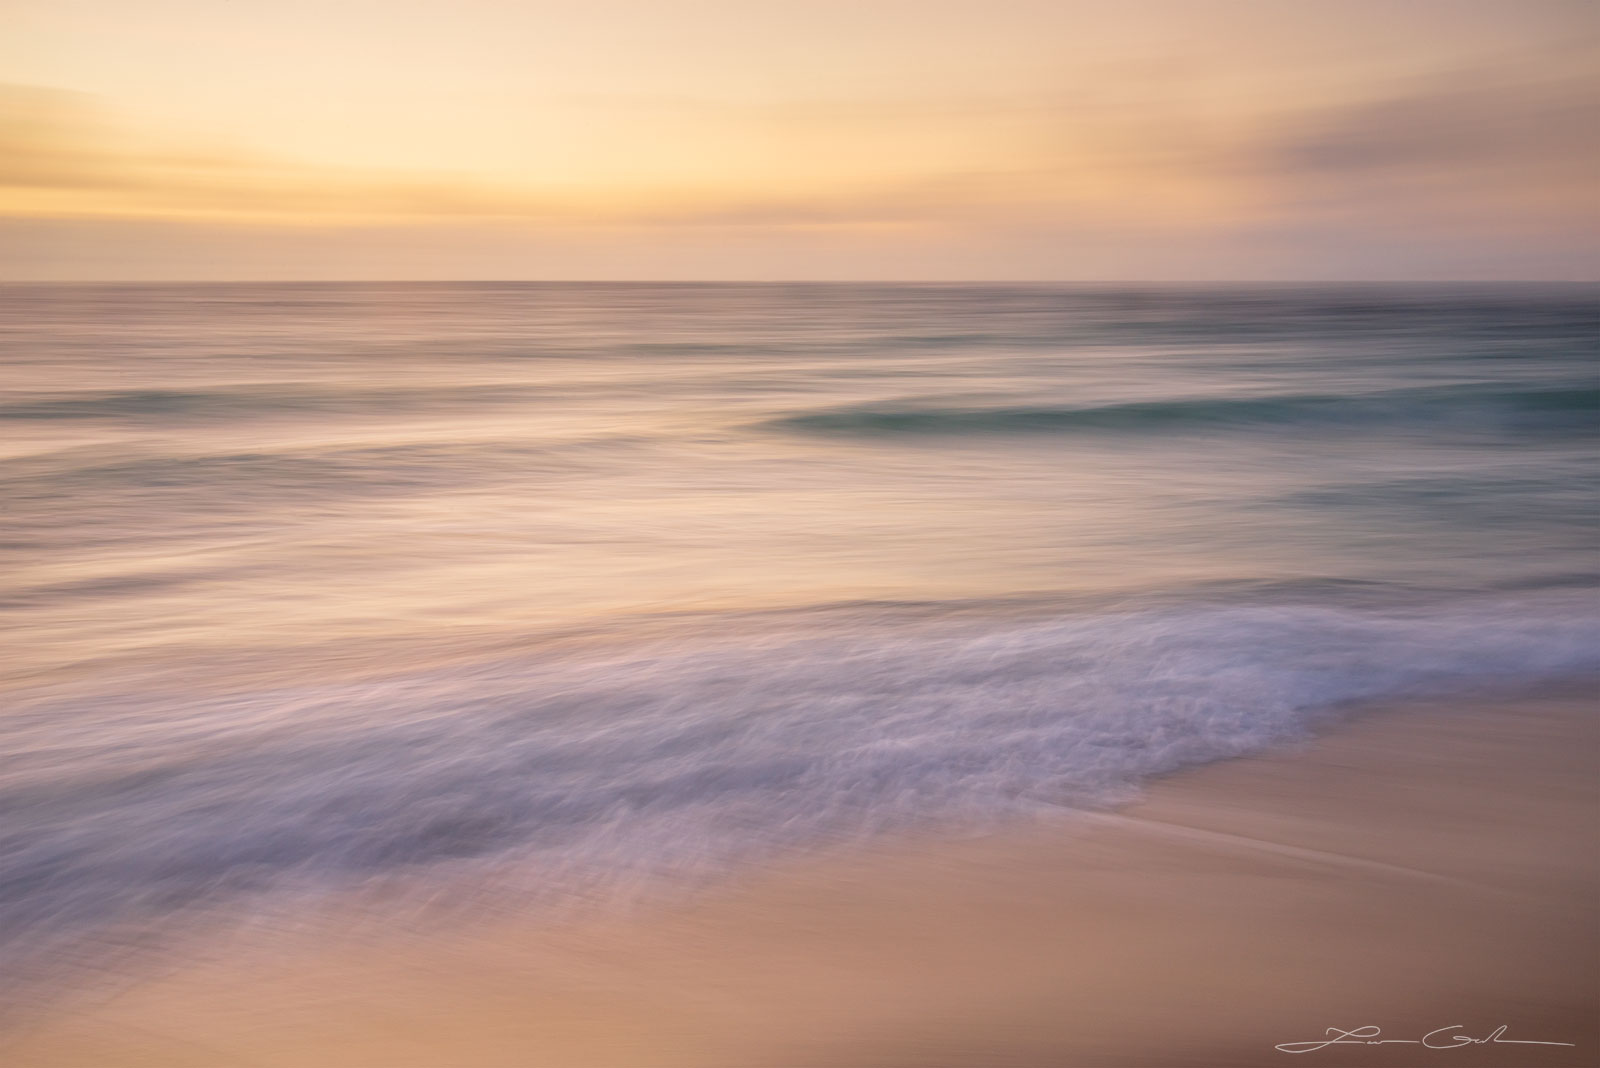 Pastel colors over an ocean shore with some waves and a sandy beach - Gintchin Fine Art